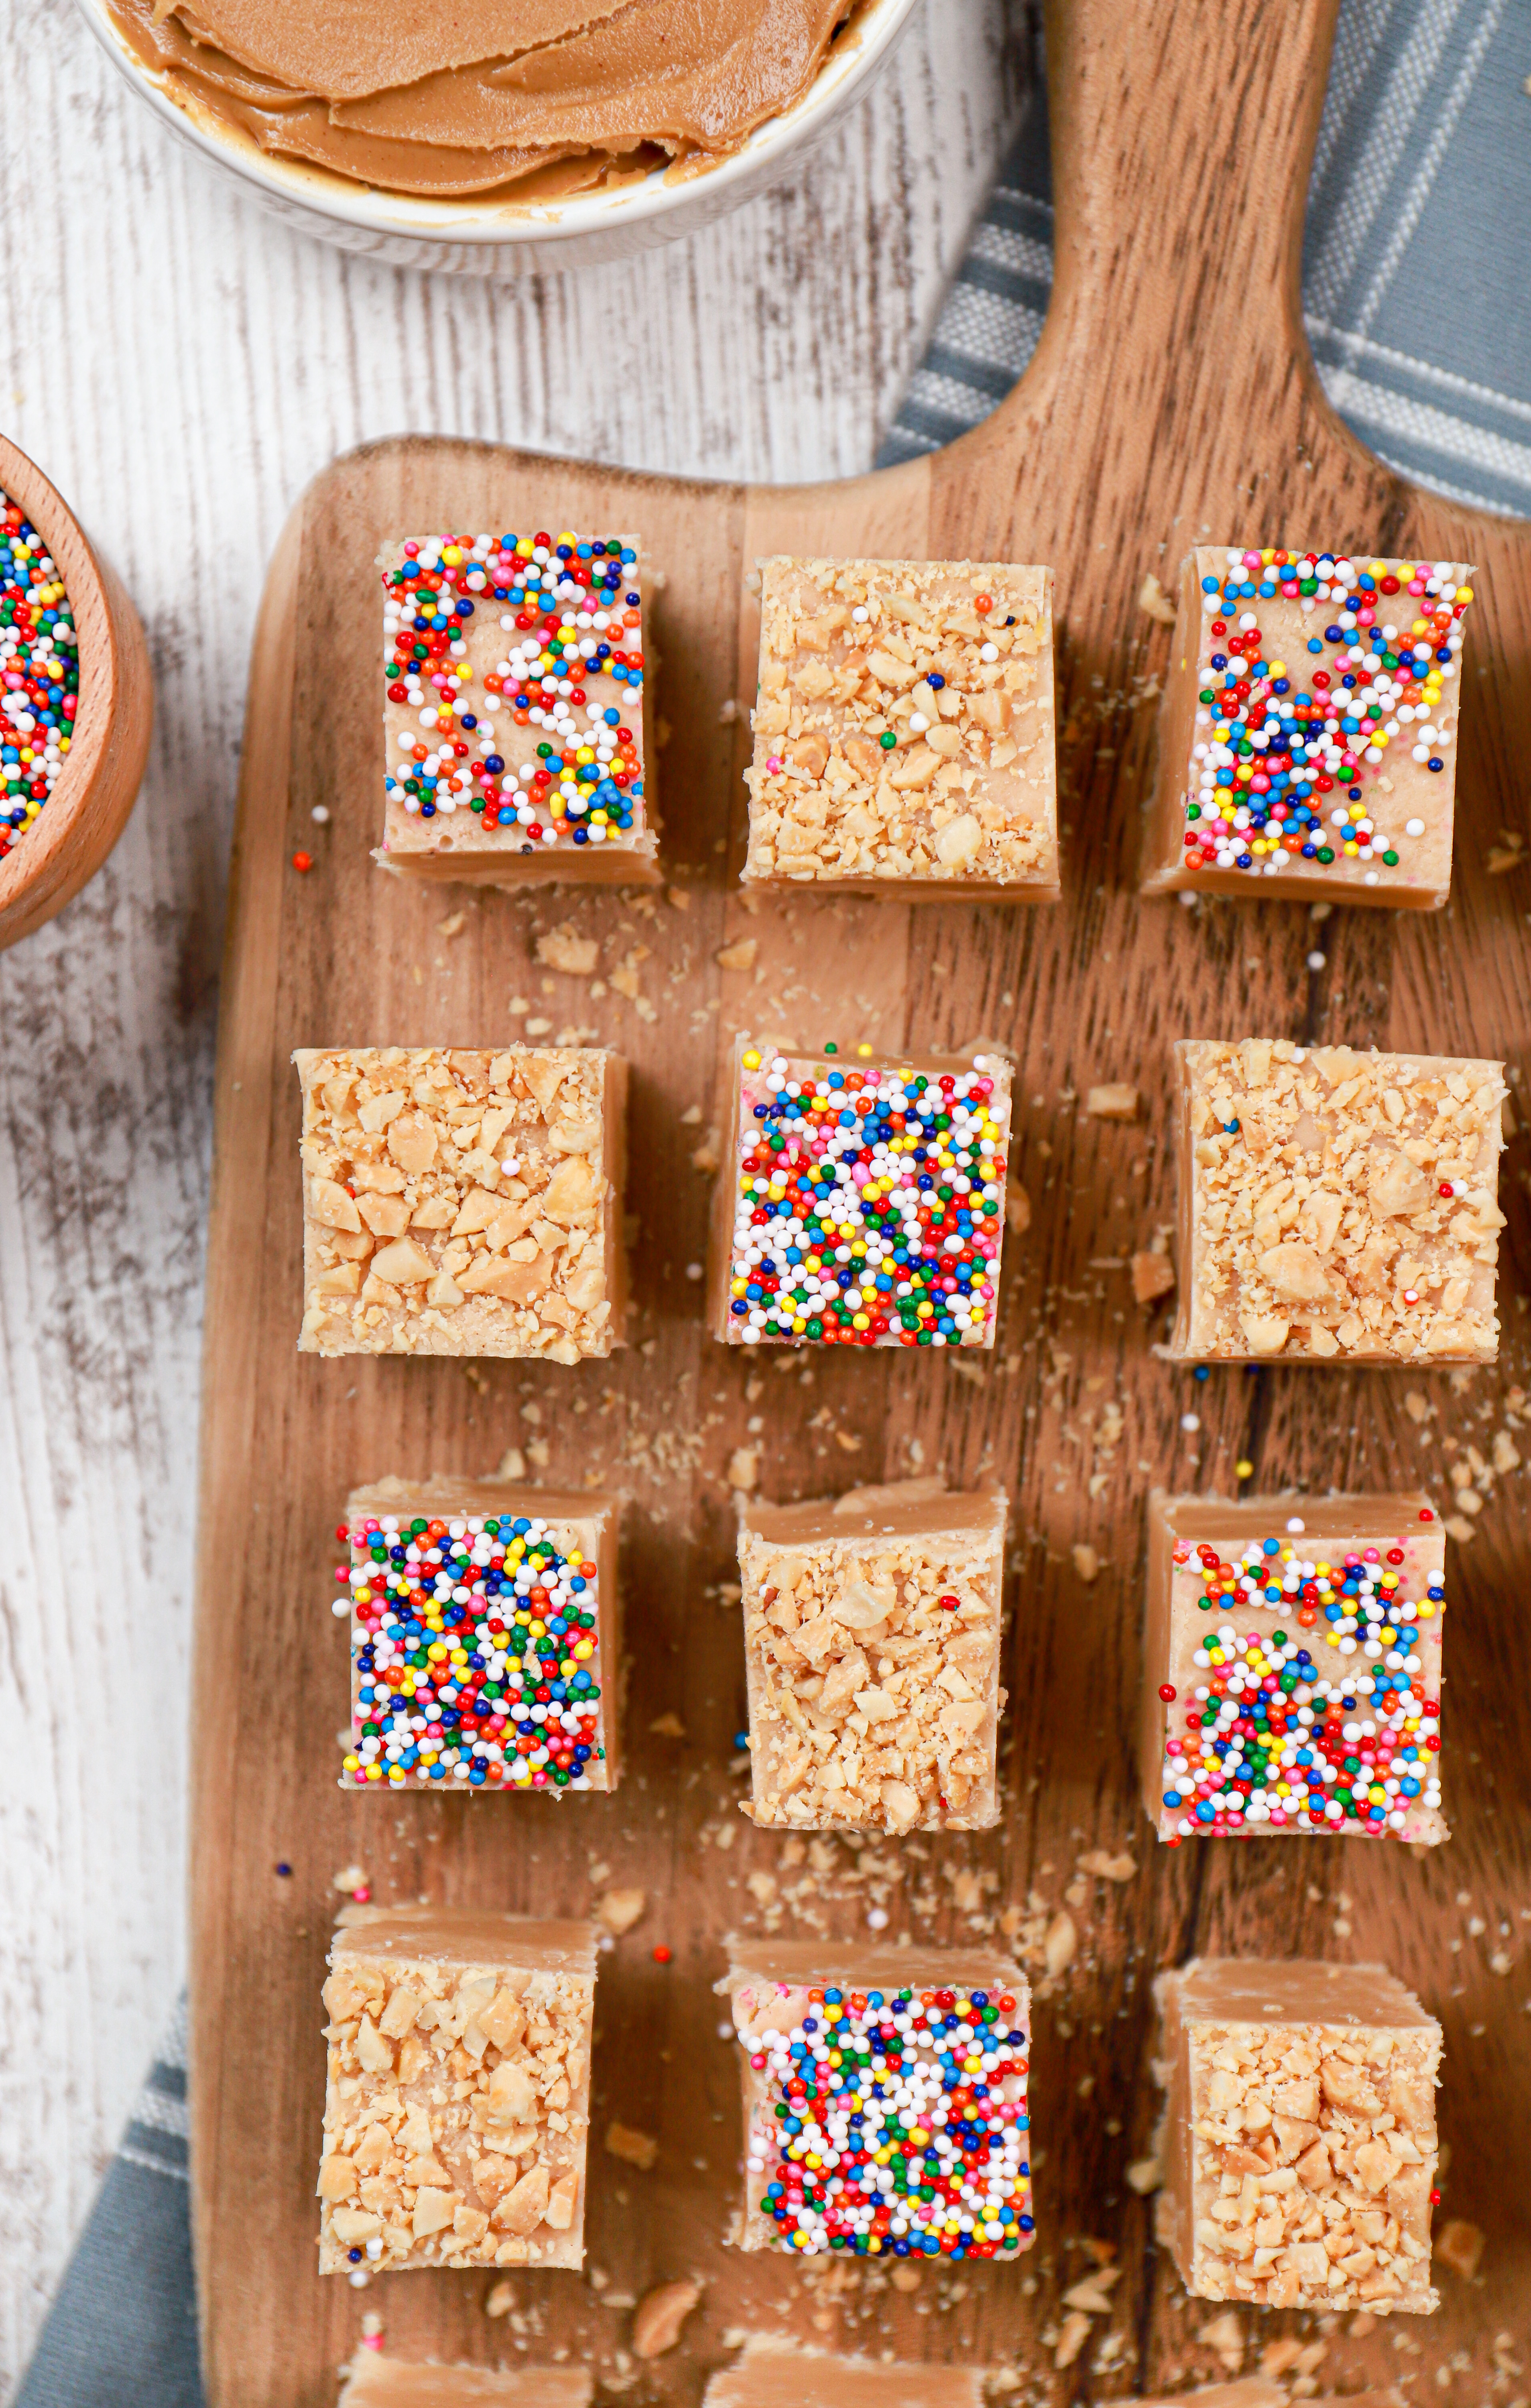 Overhead view of a batch of creamy peanut butter fudge cut into pieces on a wooden cutting board.